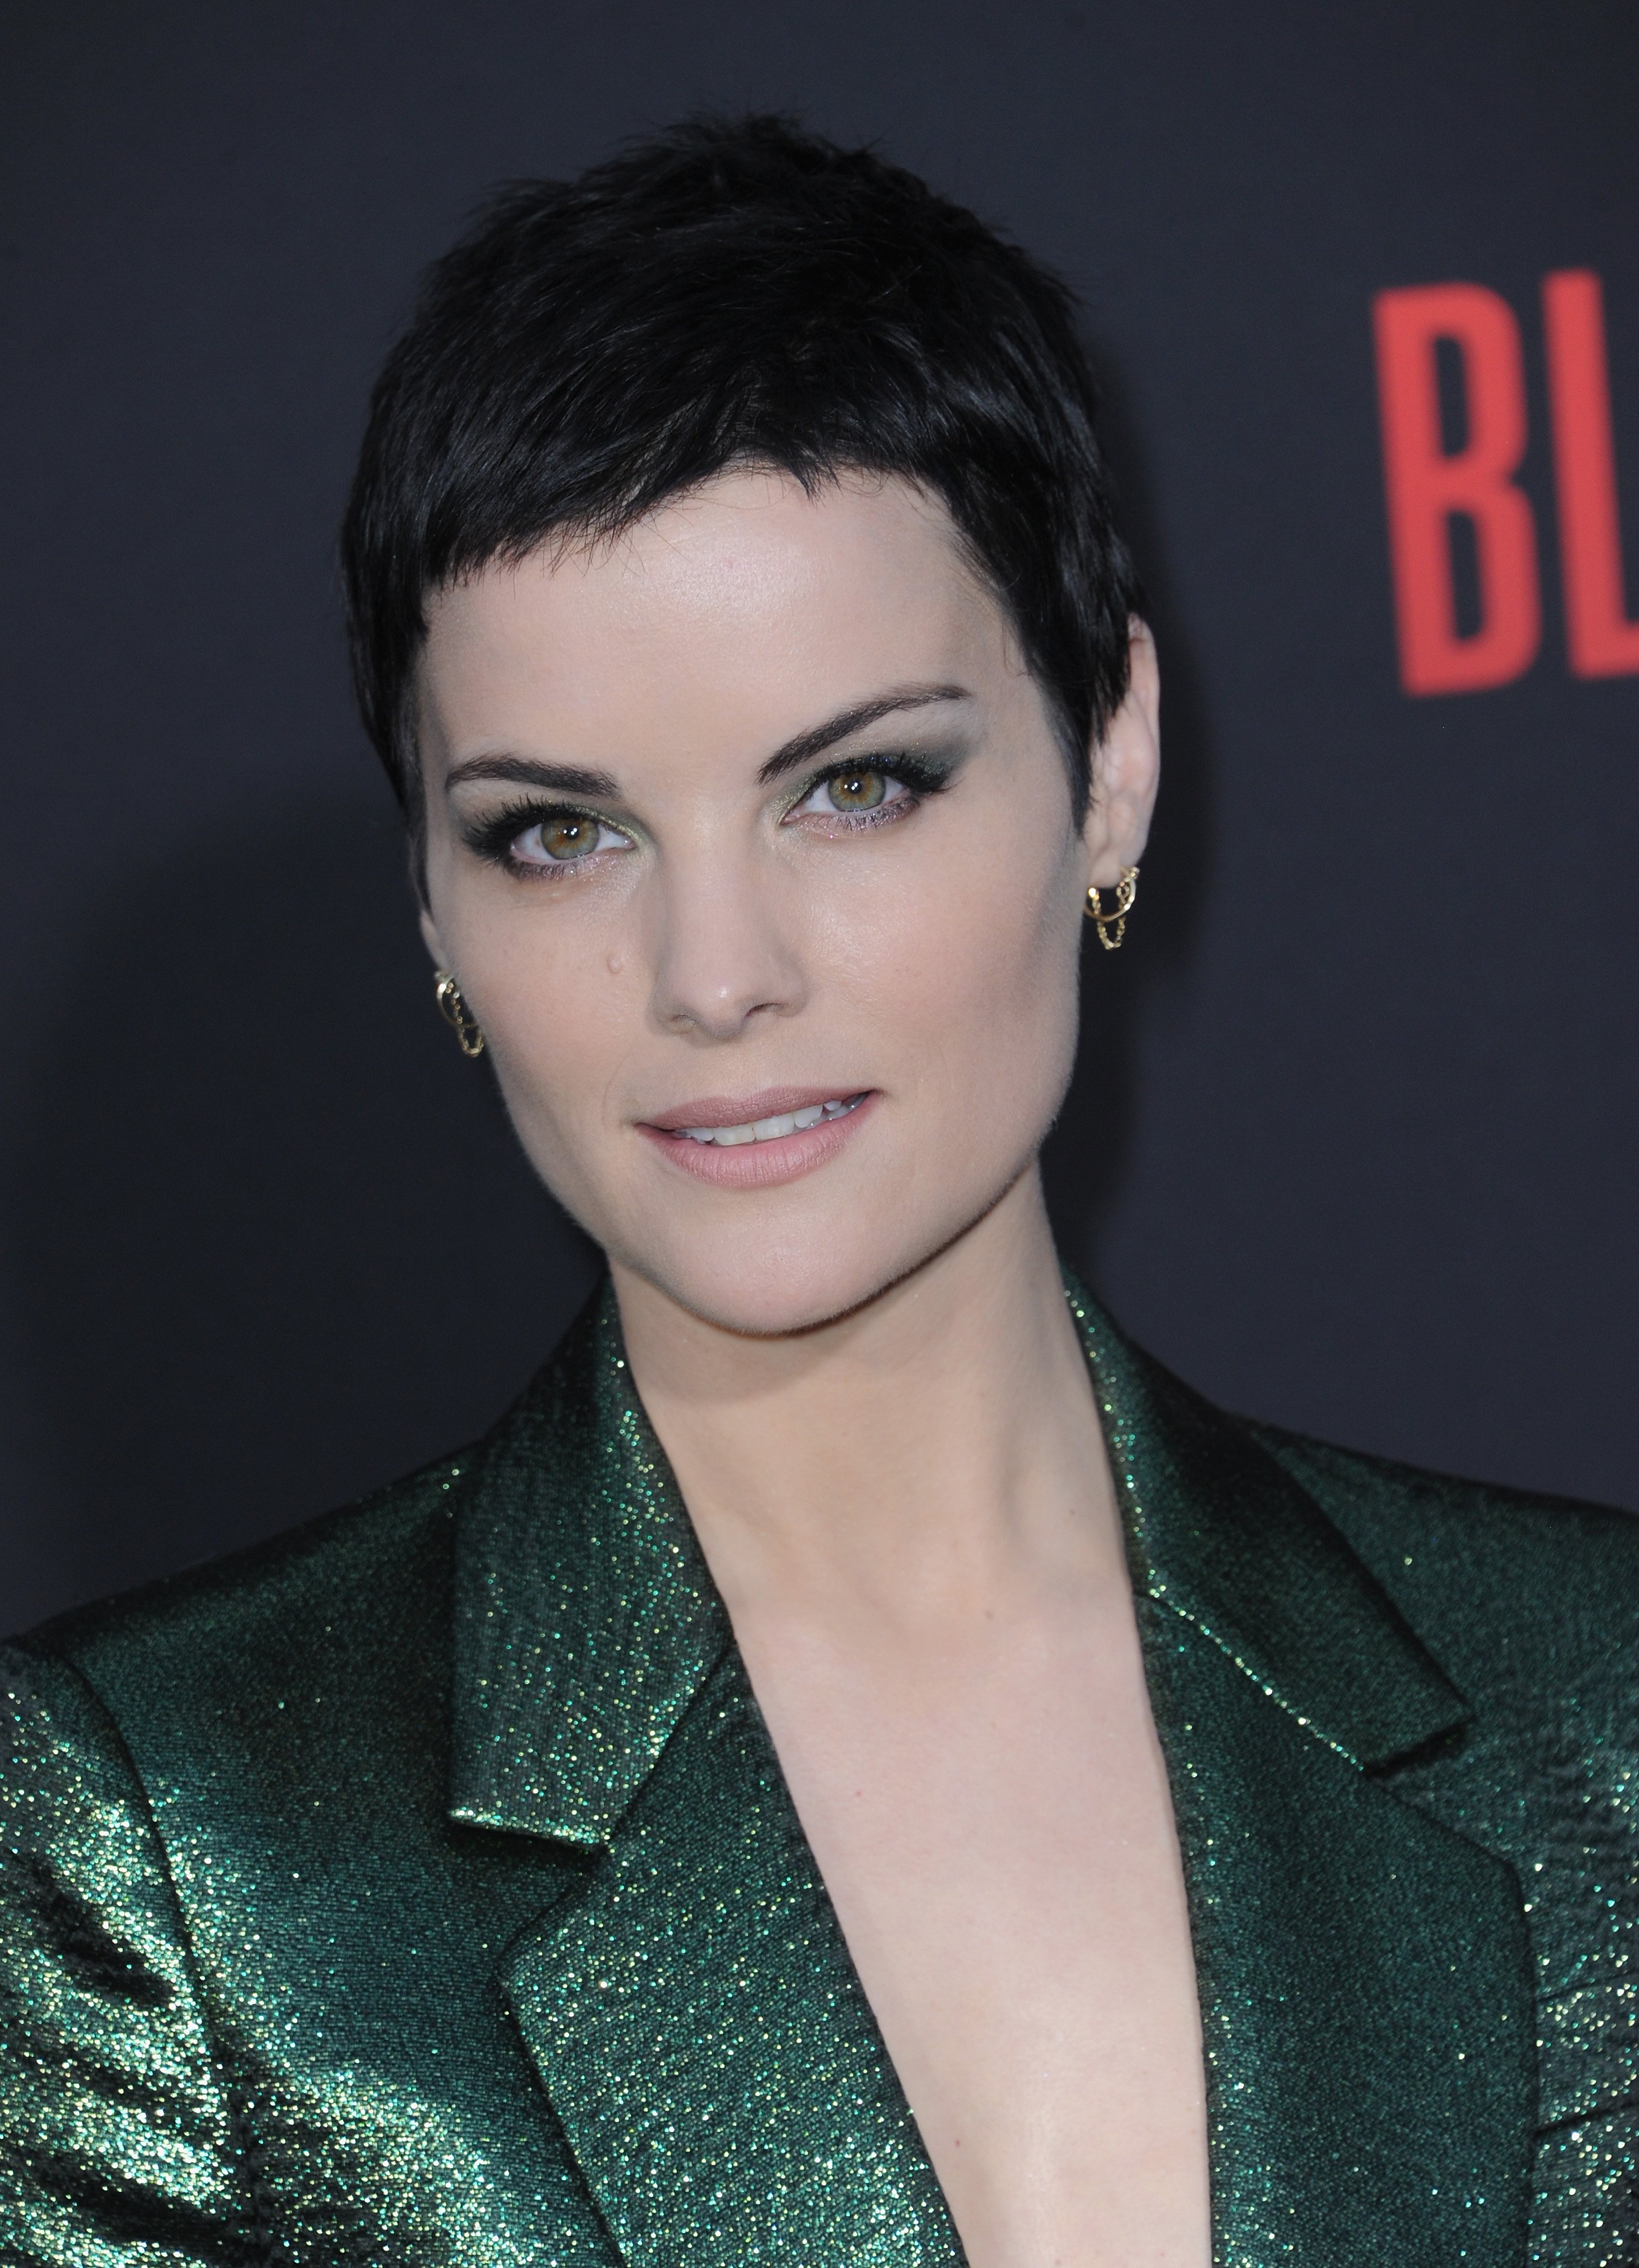 Jaimie Alexander at the Premiere Of Sony Pictures' "Bloodshot" on March 10, 2020 | Photo: Getty Images